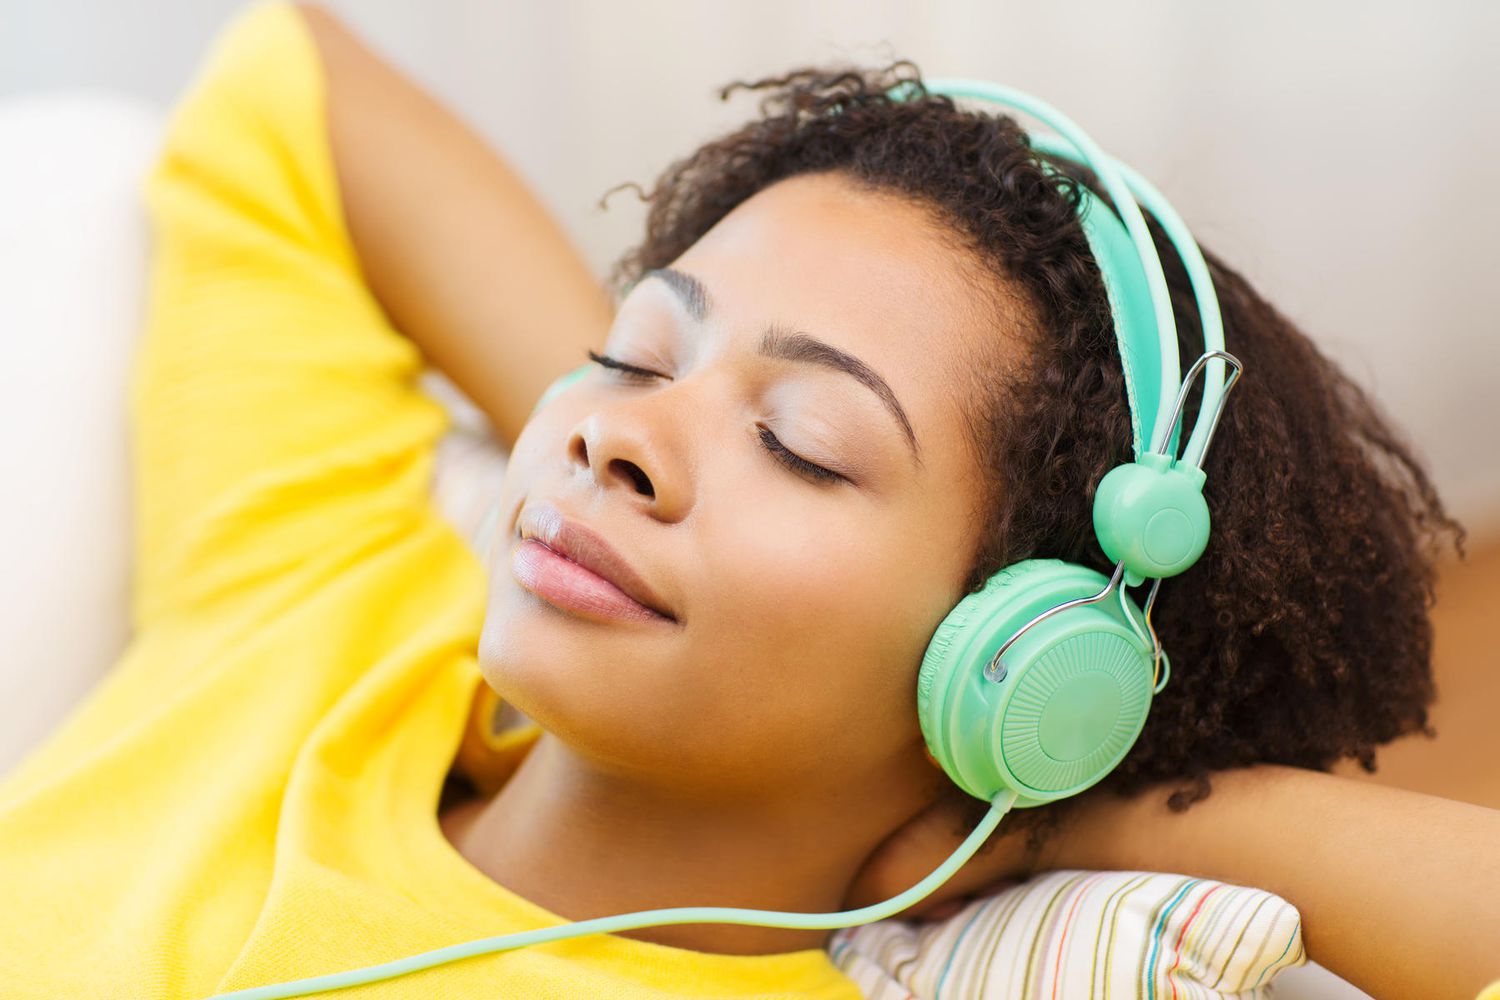 African-American woman listening to music with her eyes closed